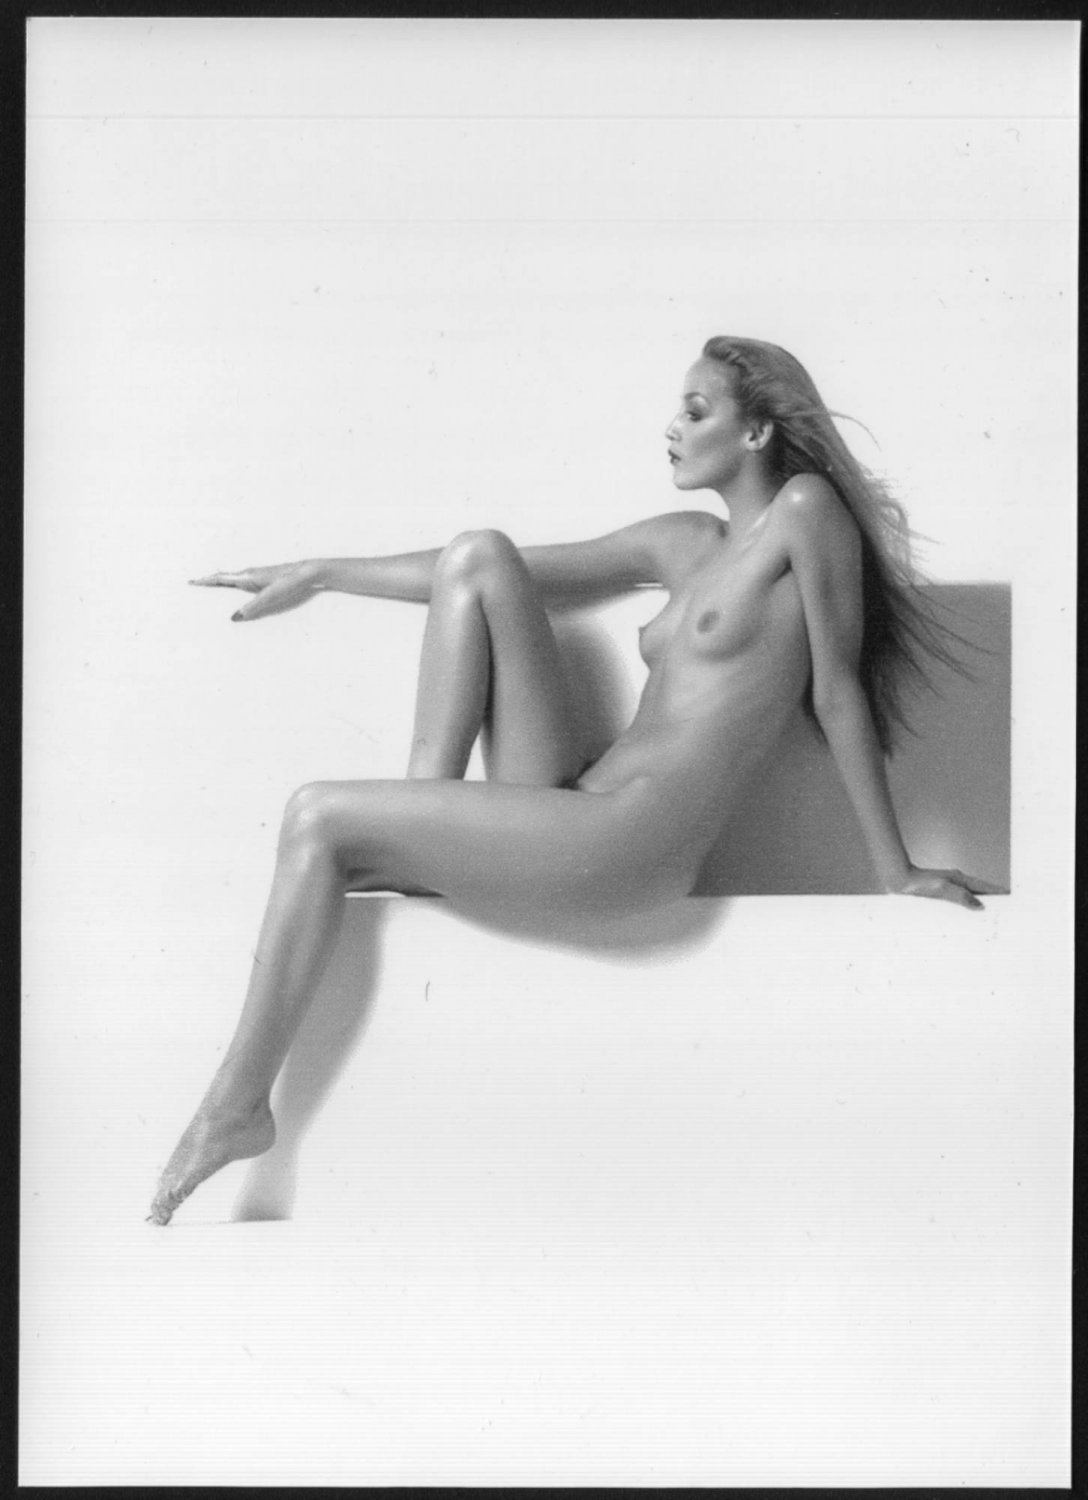 Nude jerry hall Mick Jagger's